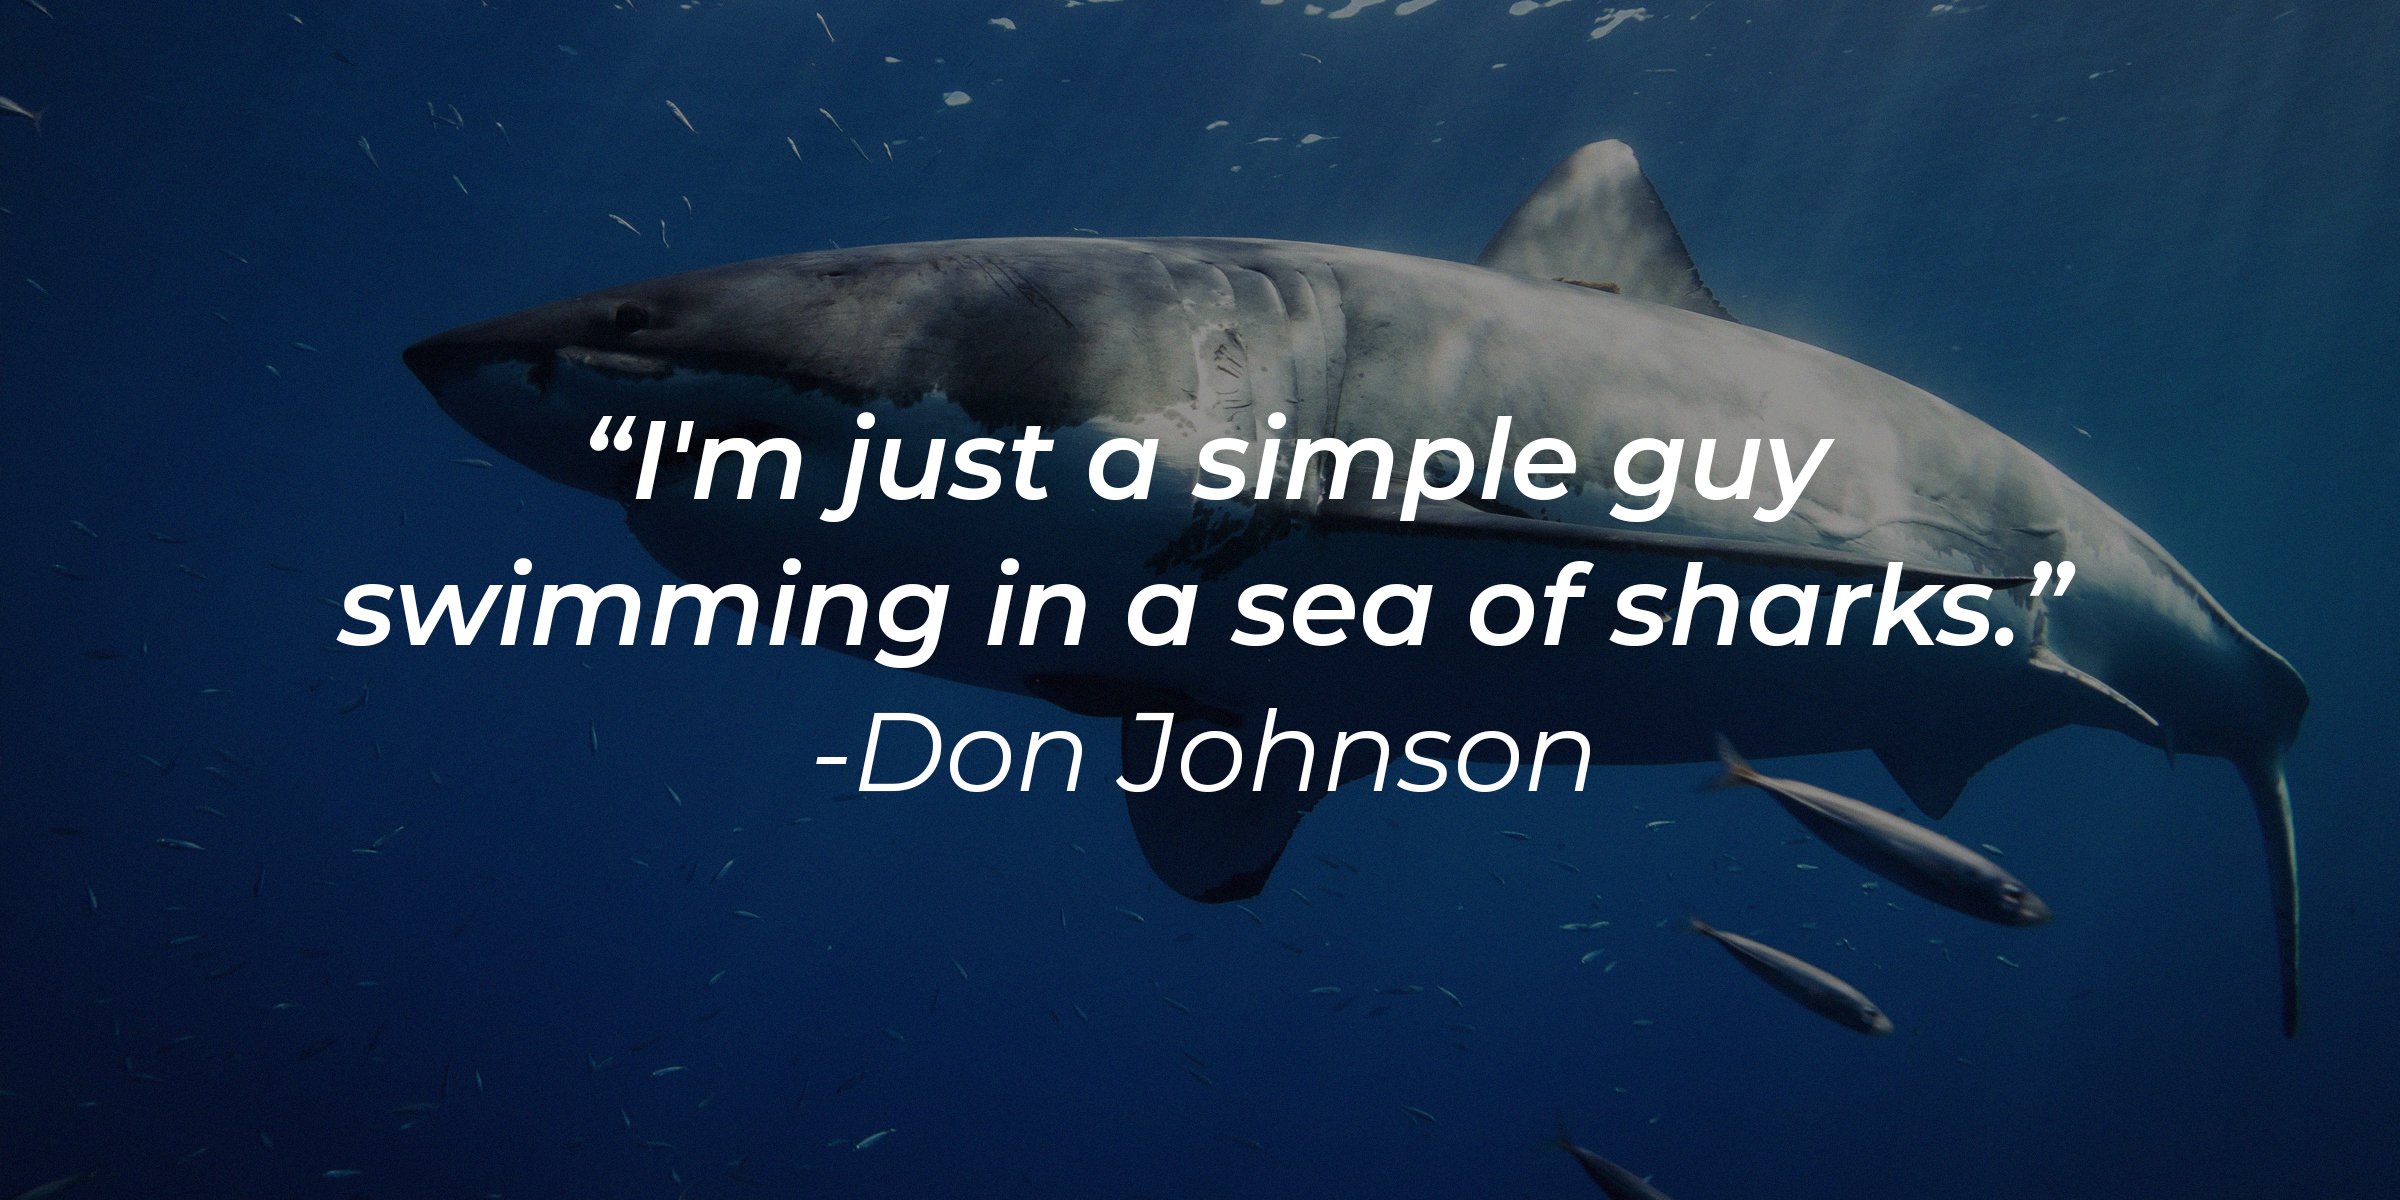 Unsplash | Don Johnson's quote: “I'm just a simple guy swimming in a sea of sharks.” | Image: AmoDays